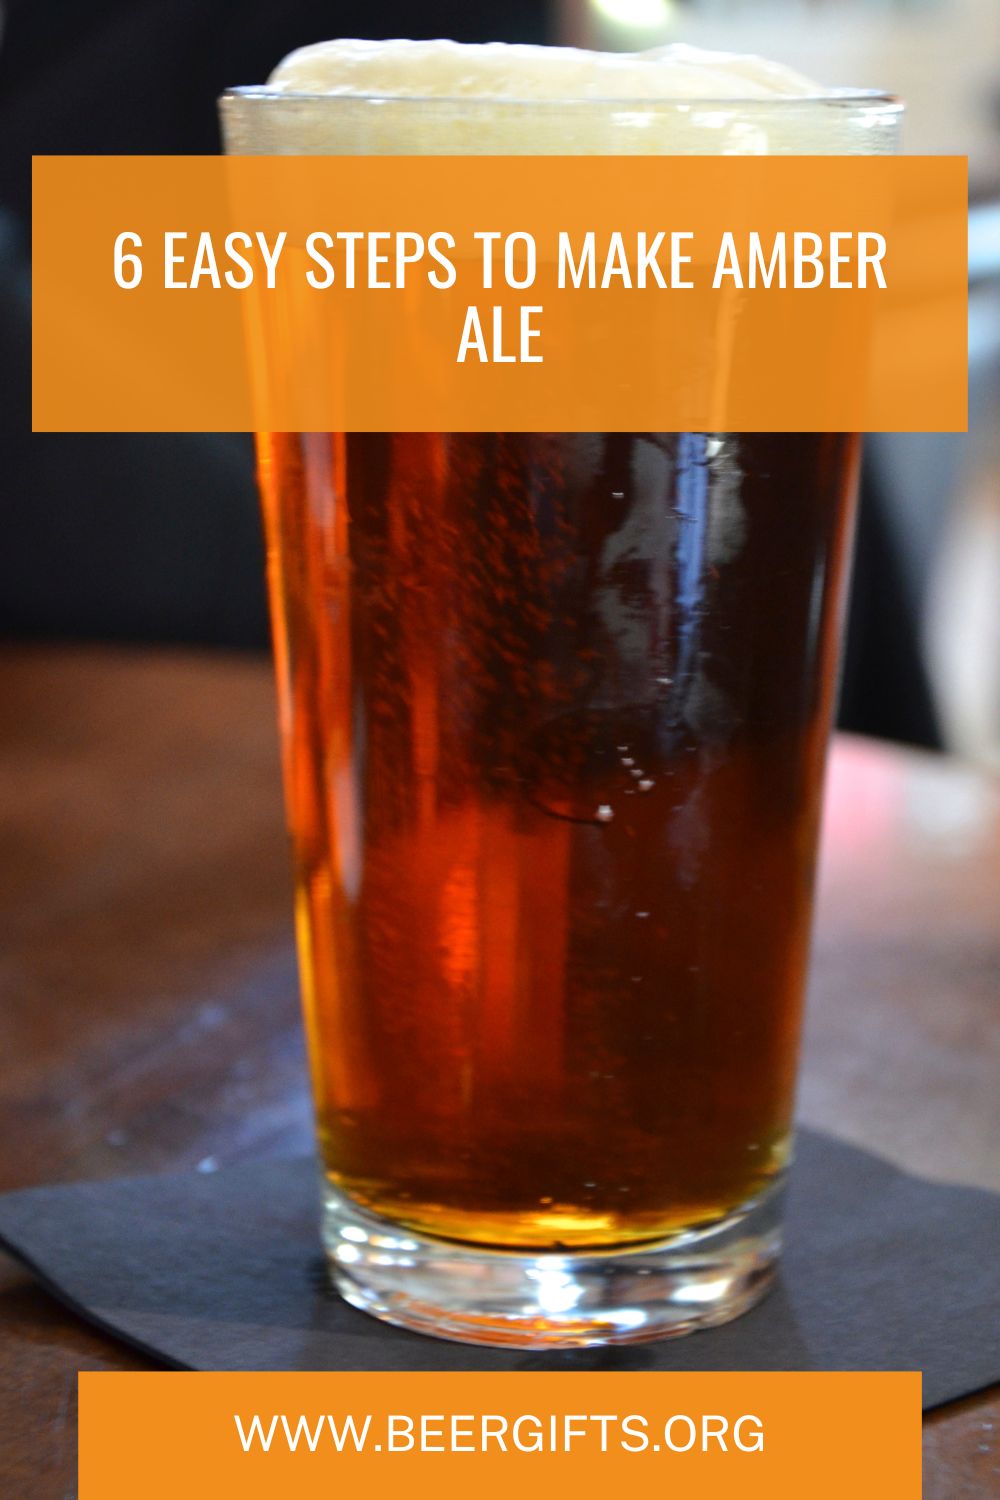 6 Easy Steps to Make Amber Ale2